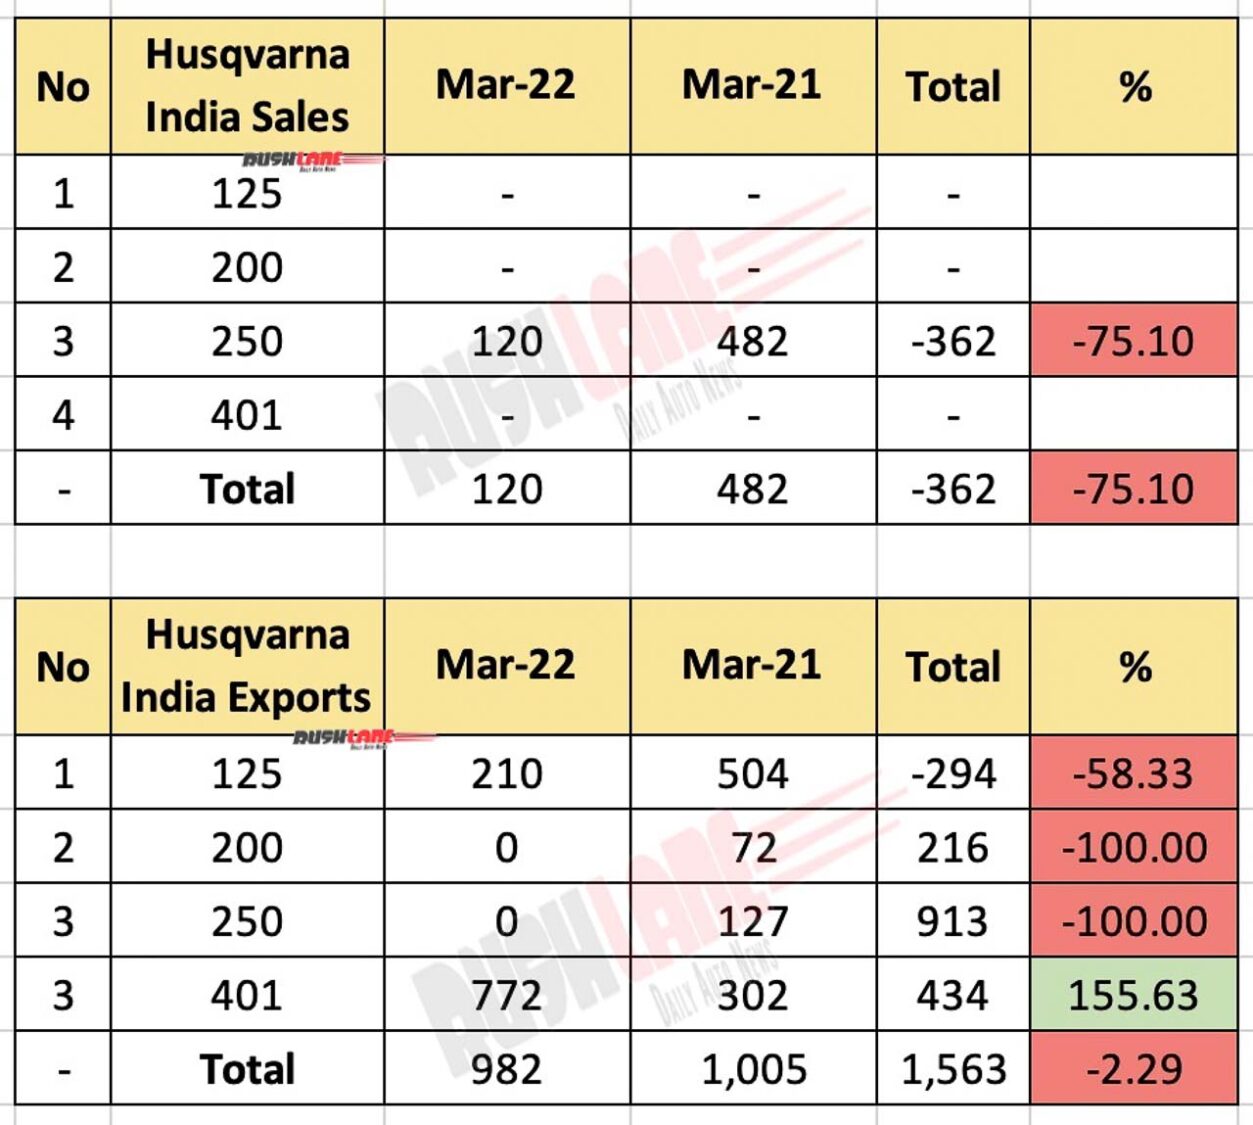 Husqvarna India Sales and Exports - March 2022